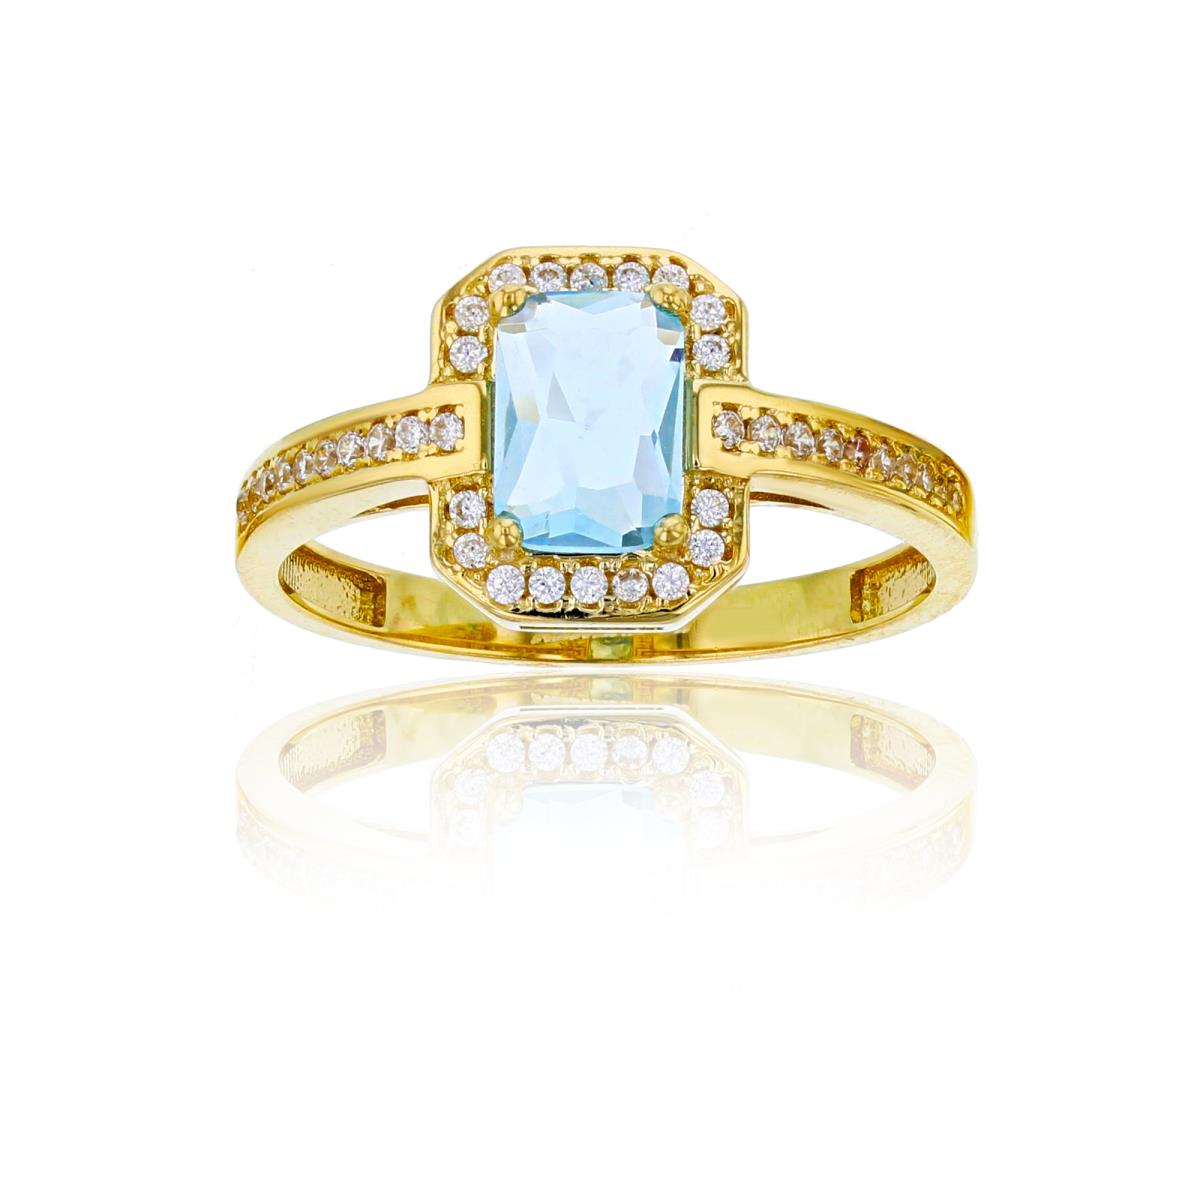 14K Yellow Gold 7x5mm Sky Blue Emerald Cut Halo Engagement Ring